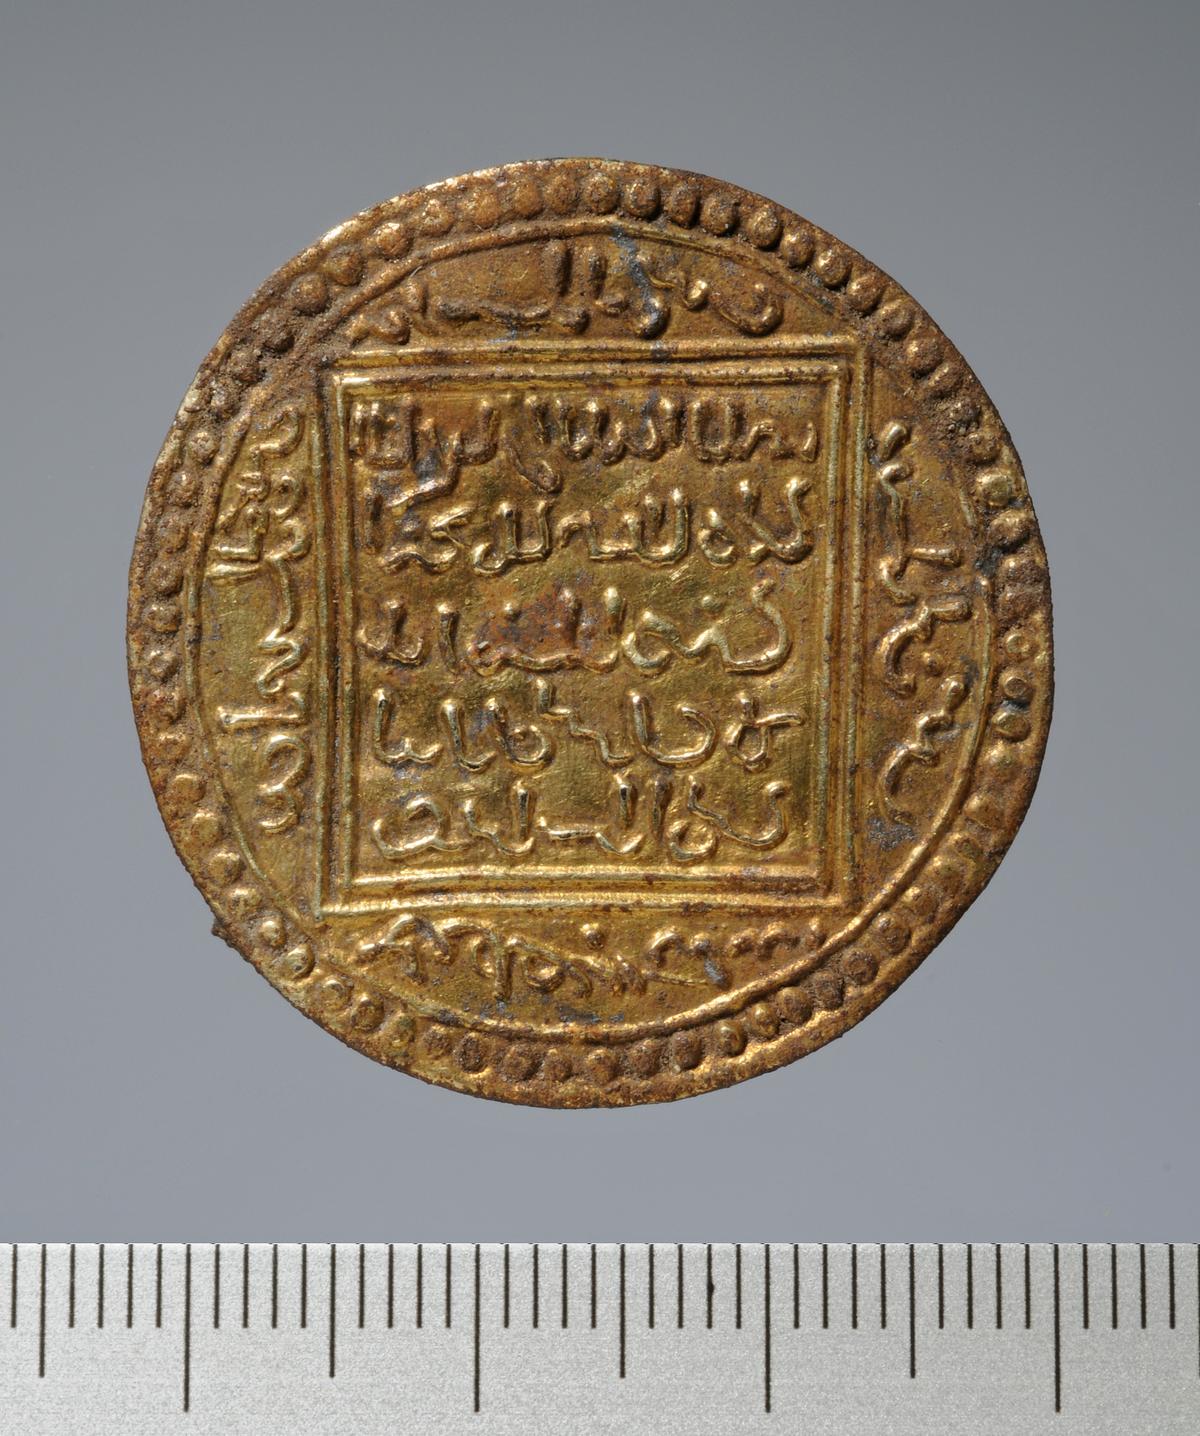 A gilded faux coin brooch, crafted to imitate an Islamic Almohad gold dinar coin, now reworked into a garment clasp in the Scandinavian tradition. (Courtesy of <a href="http://www.schleswig-holstein.de/">ALSH</a>)